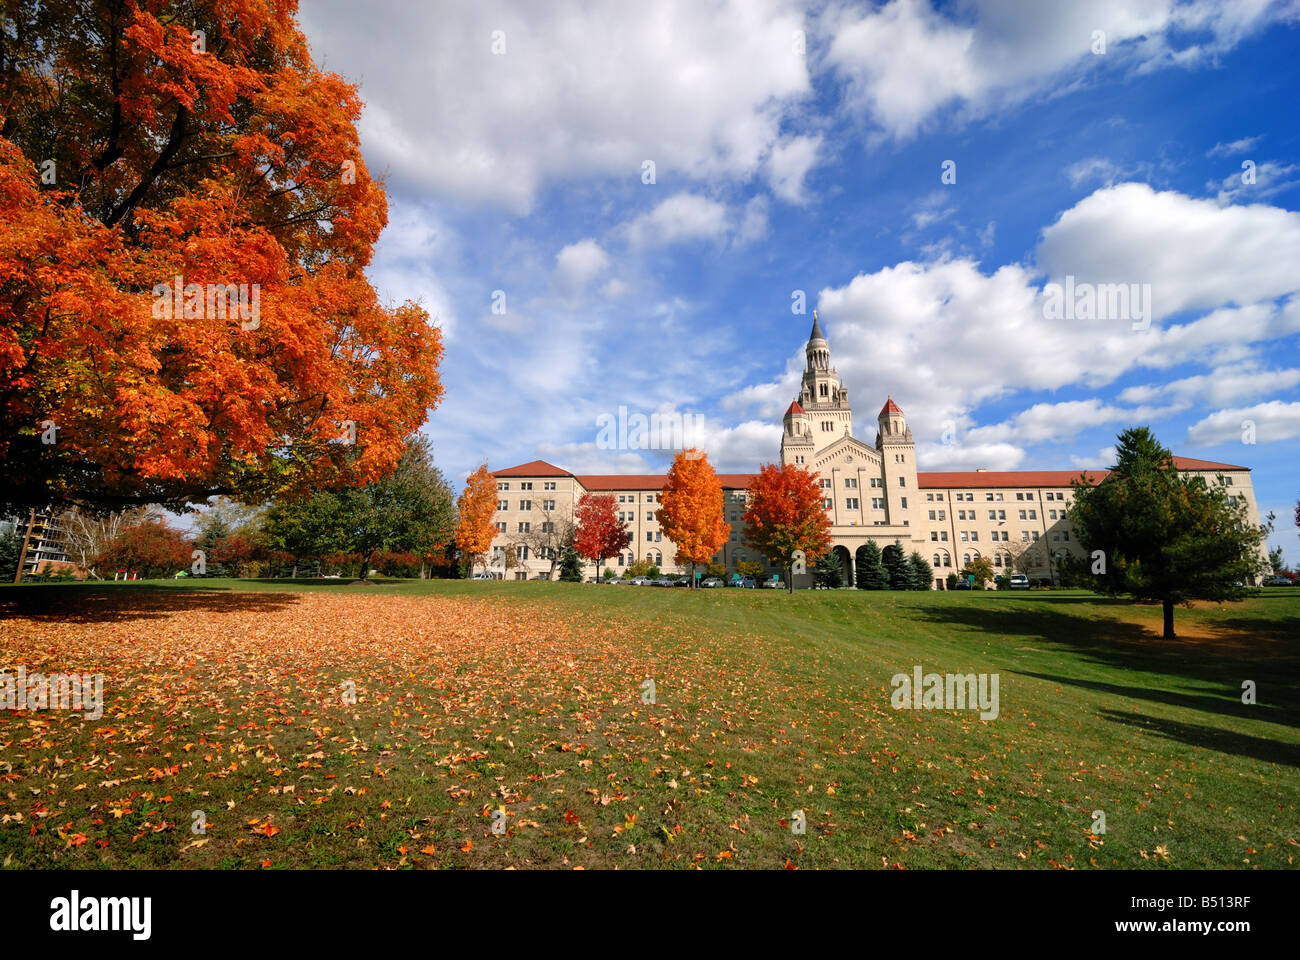 The Providence Heights building on the campus of LaRoche College in Pittsburgh, Pennsylvania on a crisp, autumn day. Stock Photo